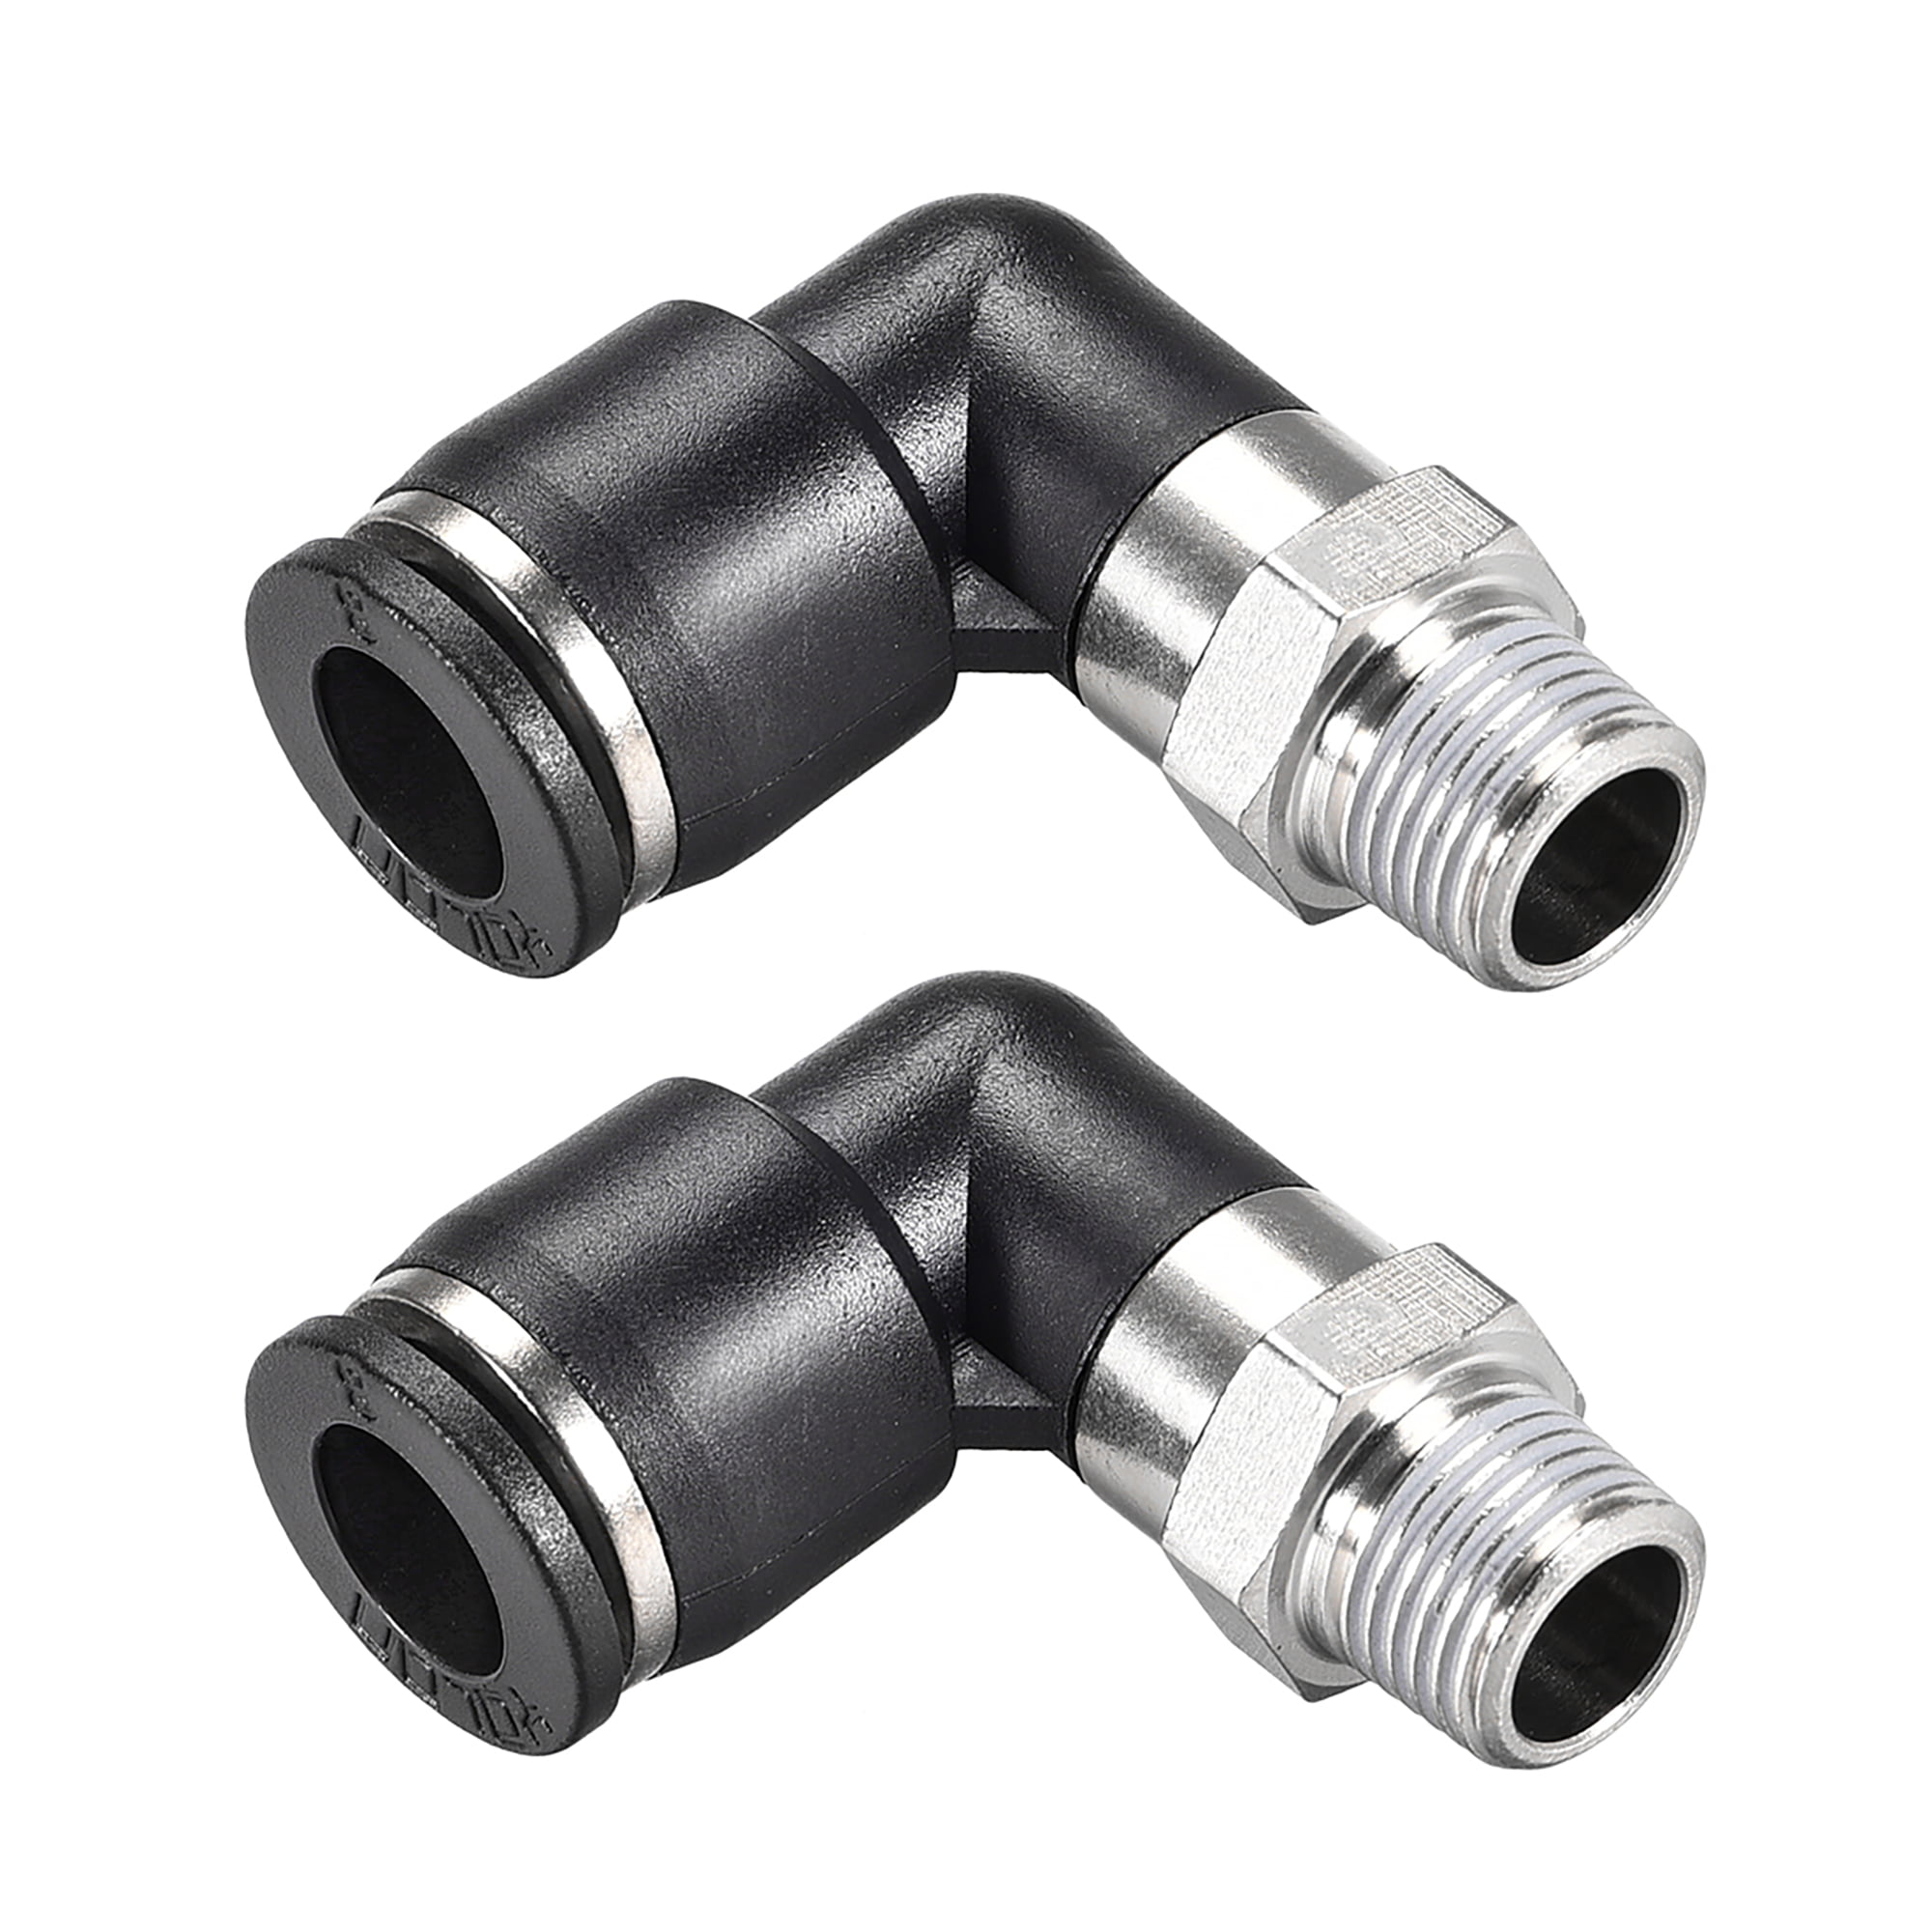 5pc Pnuematic Male Elbow Connector Tube 1/4'' X NPT 3/8'' Air Push In Fitting 